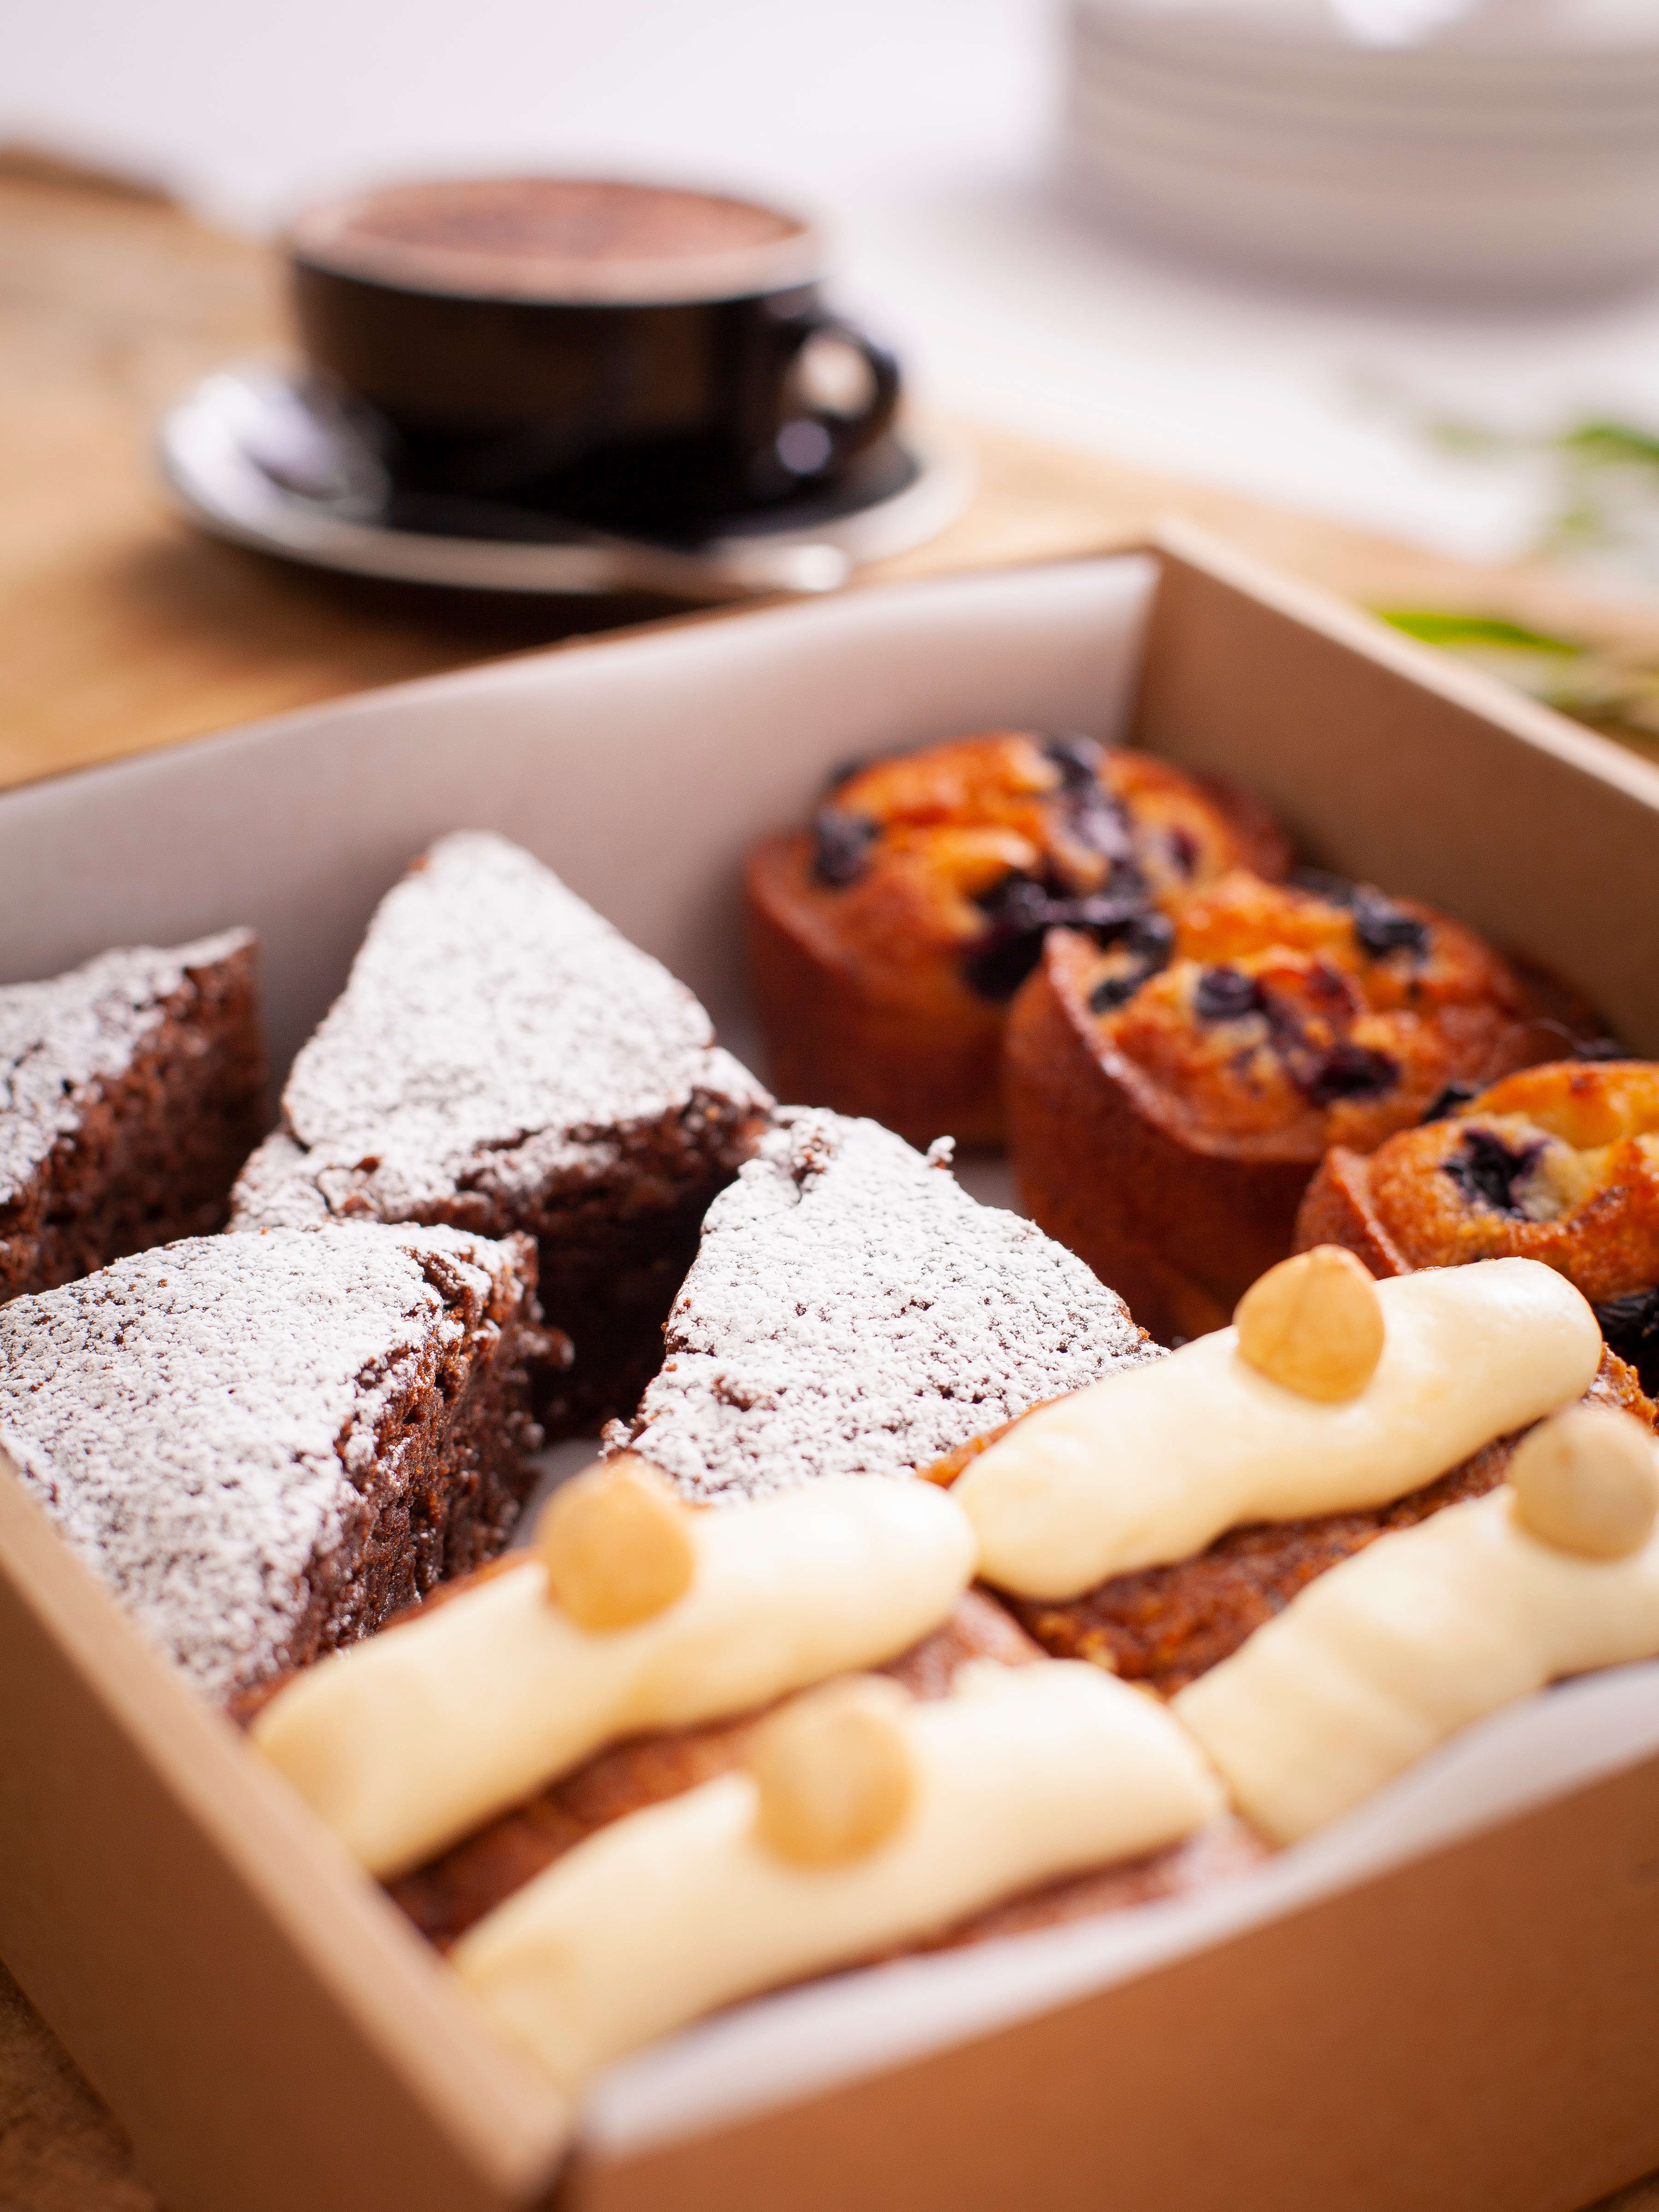 Cappuccino with gluten free sweet box containing 12 items including chocolate brownie, friands, cake. Photo: Richard Jupe.